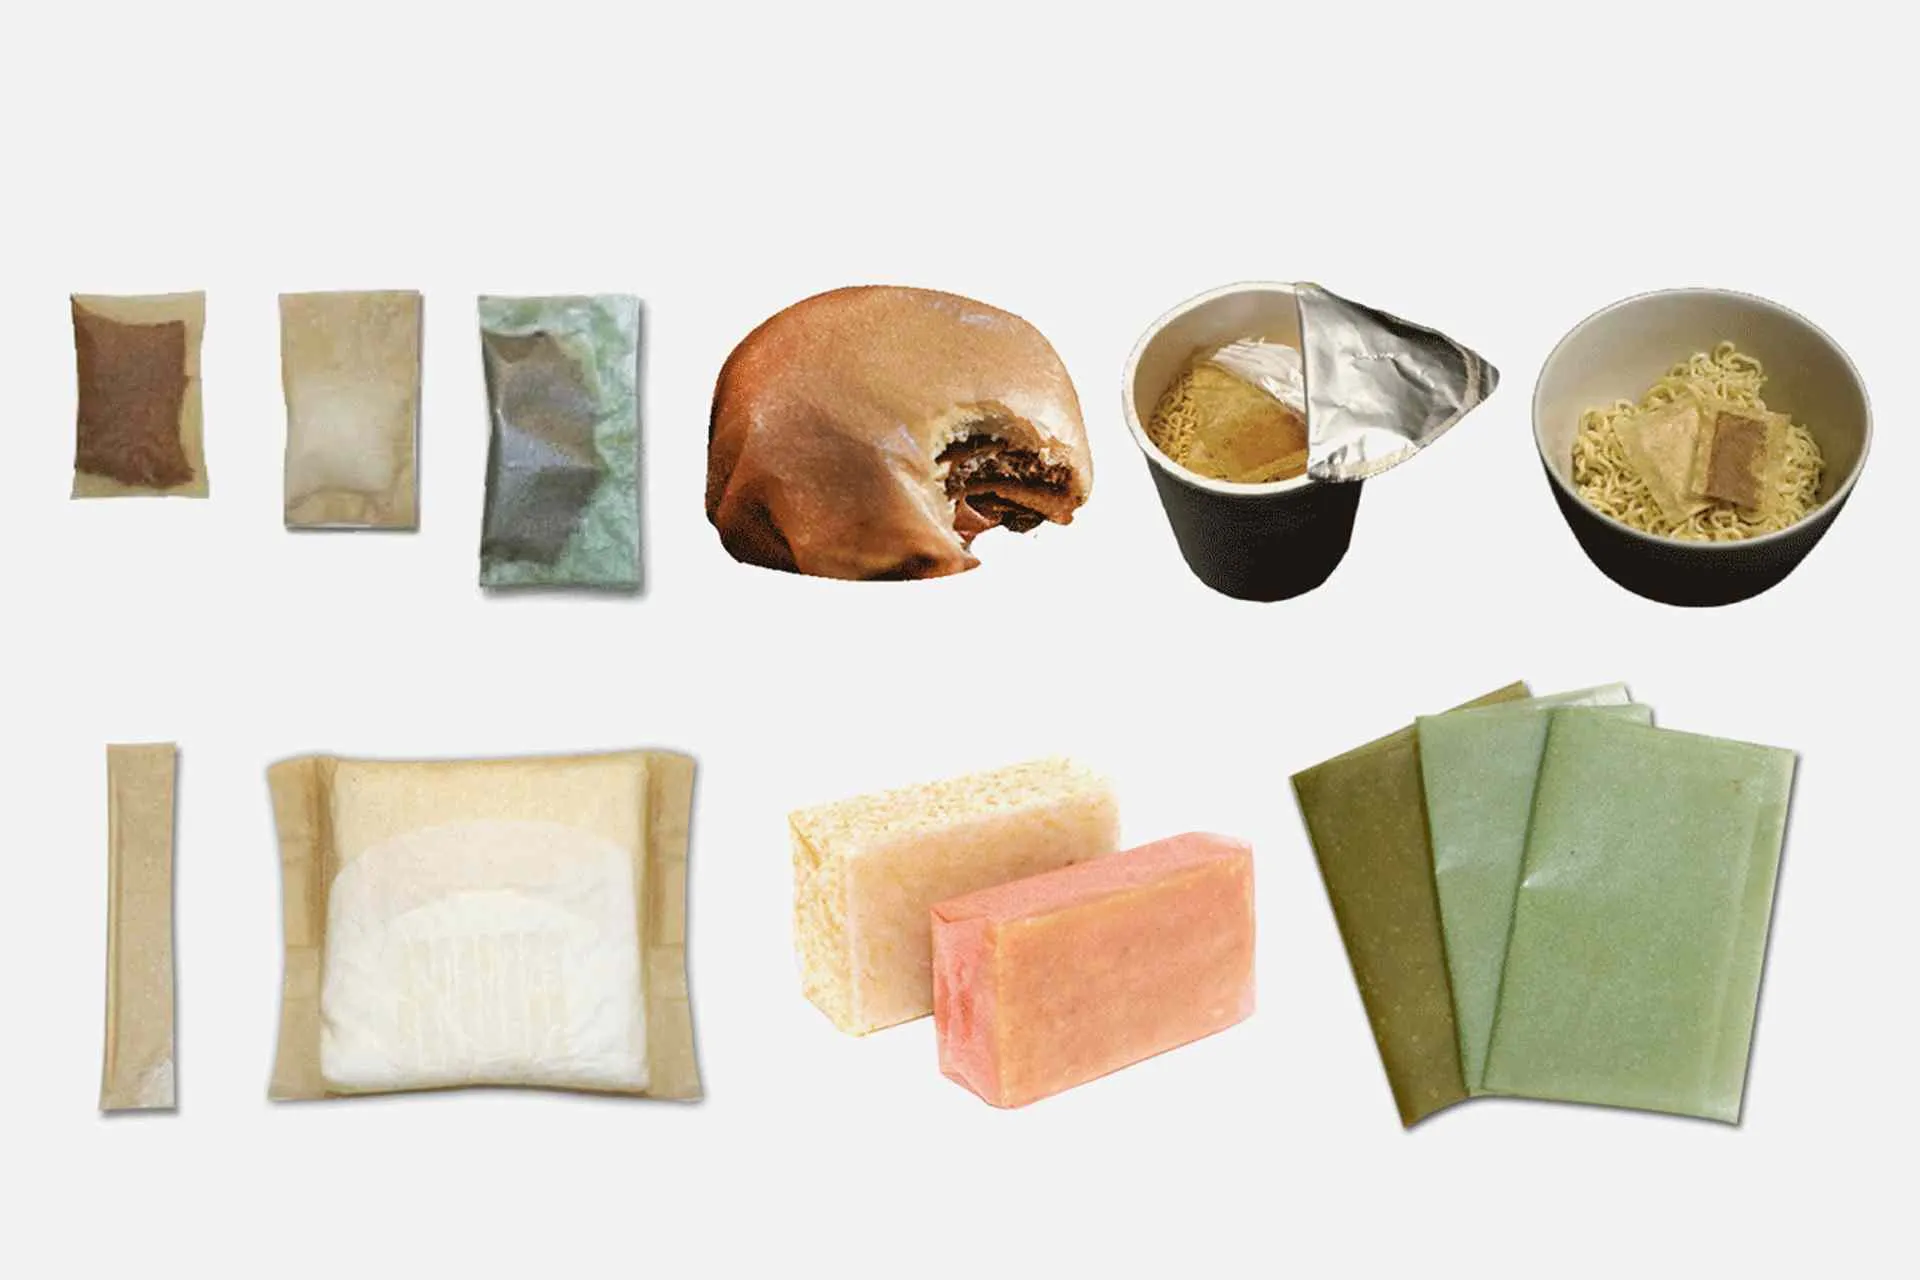 Evoware turn seaweed into different kinds of packaging